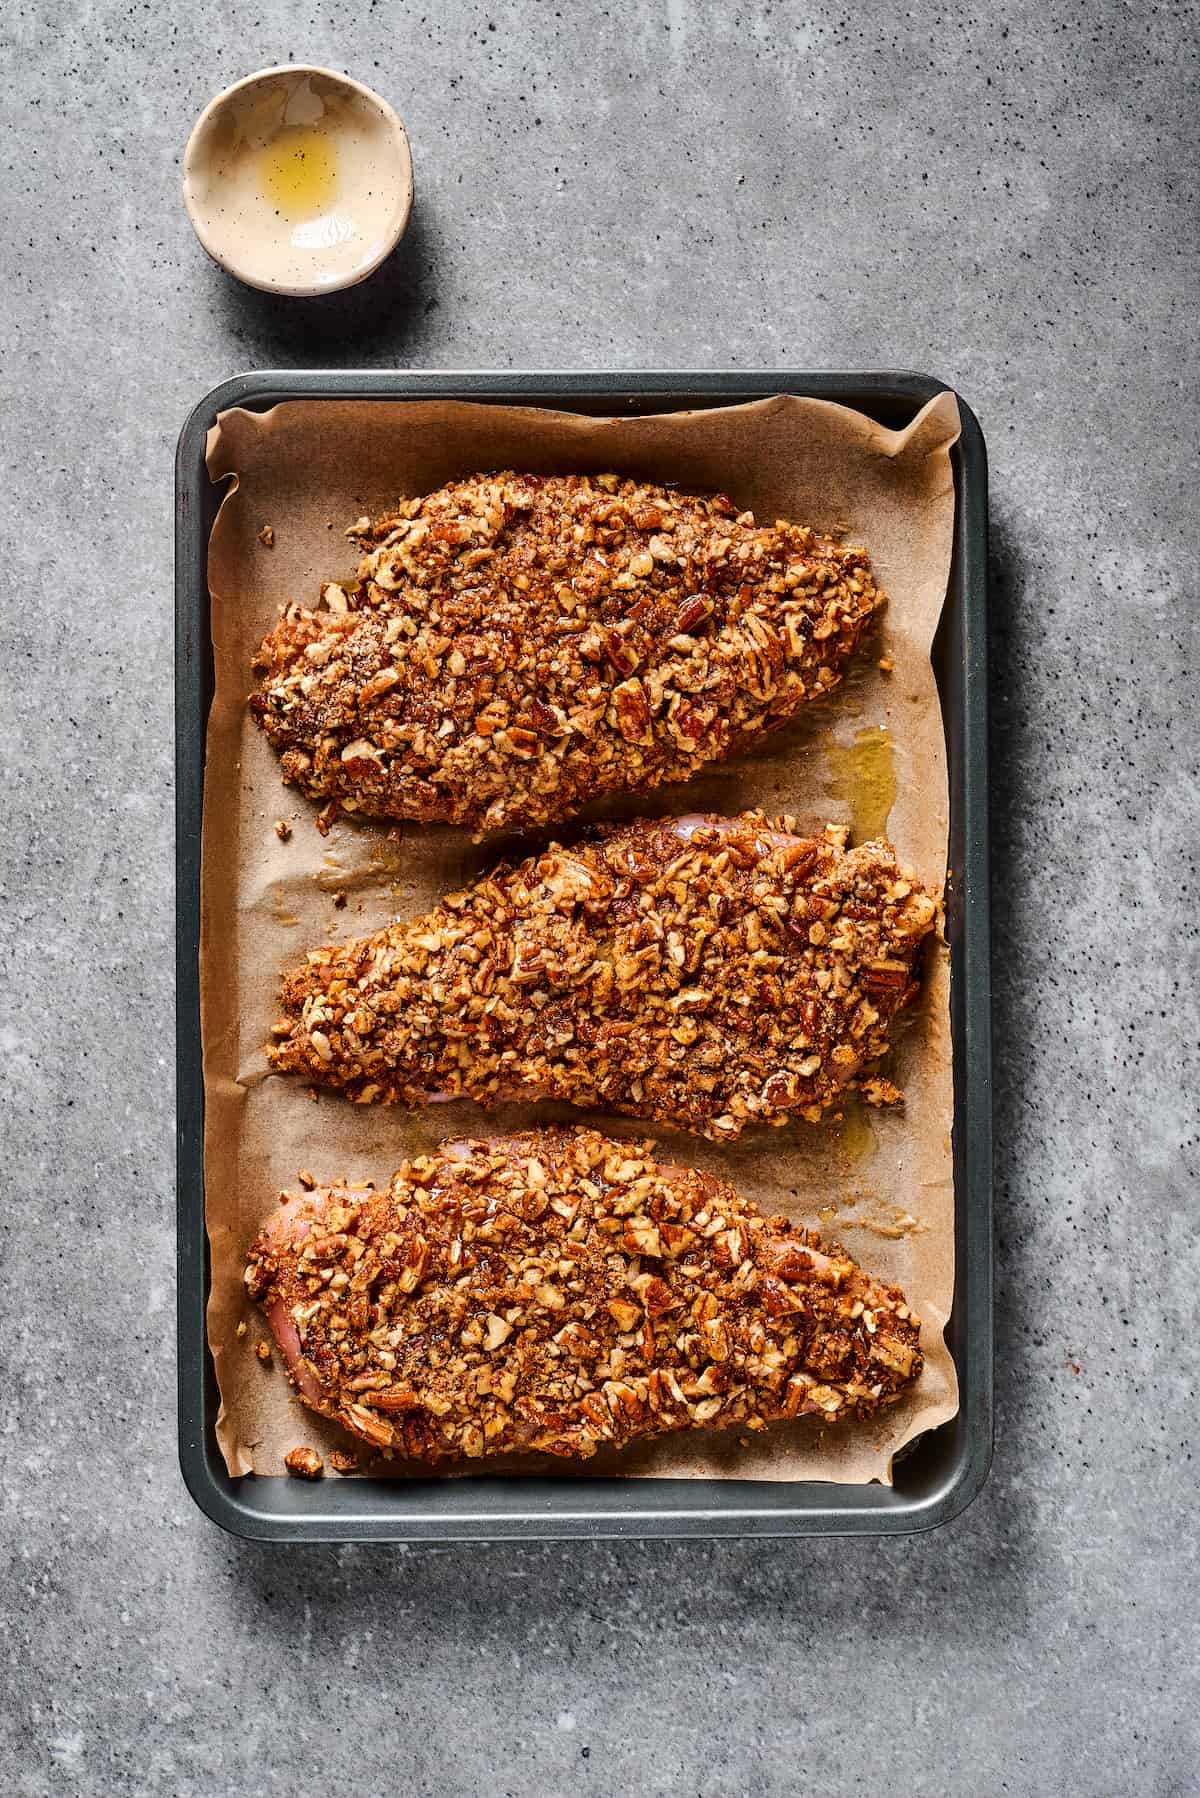 Pecan-coated chicken on a baking sheet.